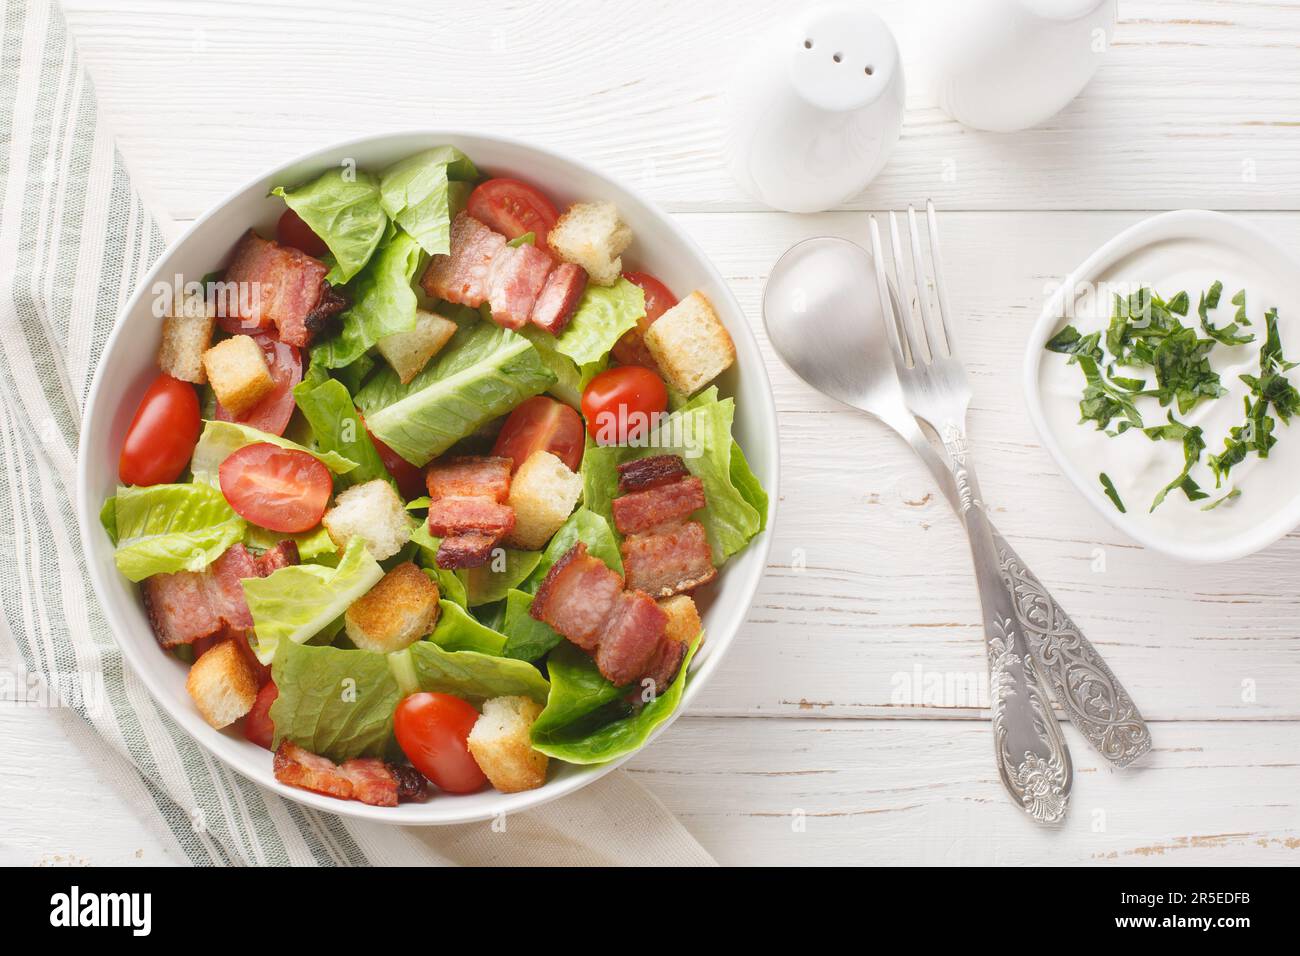 Healthy Organic BLT Bacon Salad with Lettuce and Tomato closeup on the plate on the table. Horizontal top view from above Stock Photo